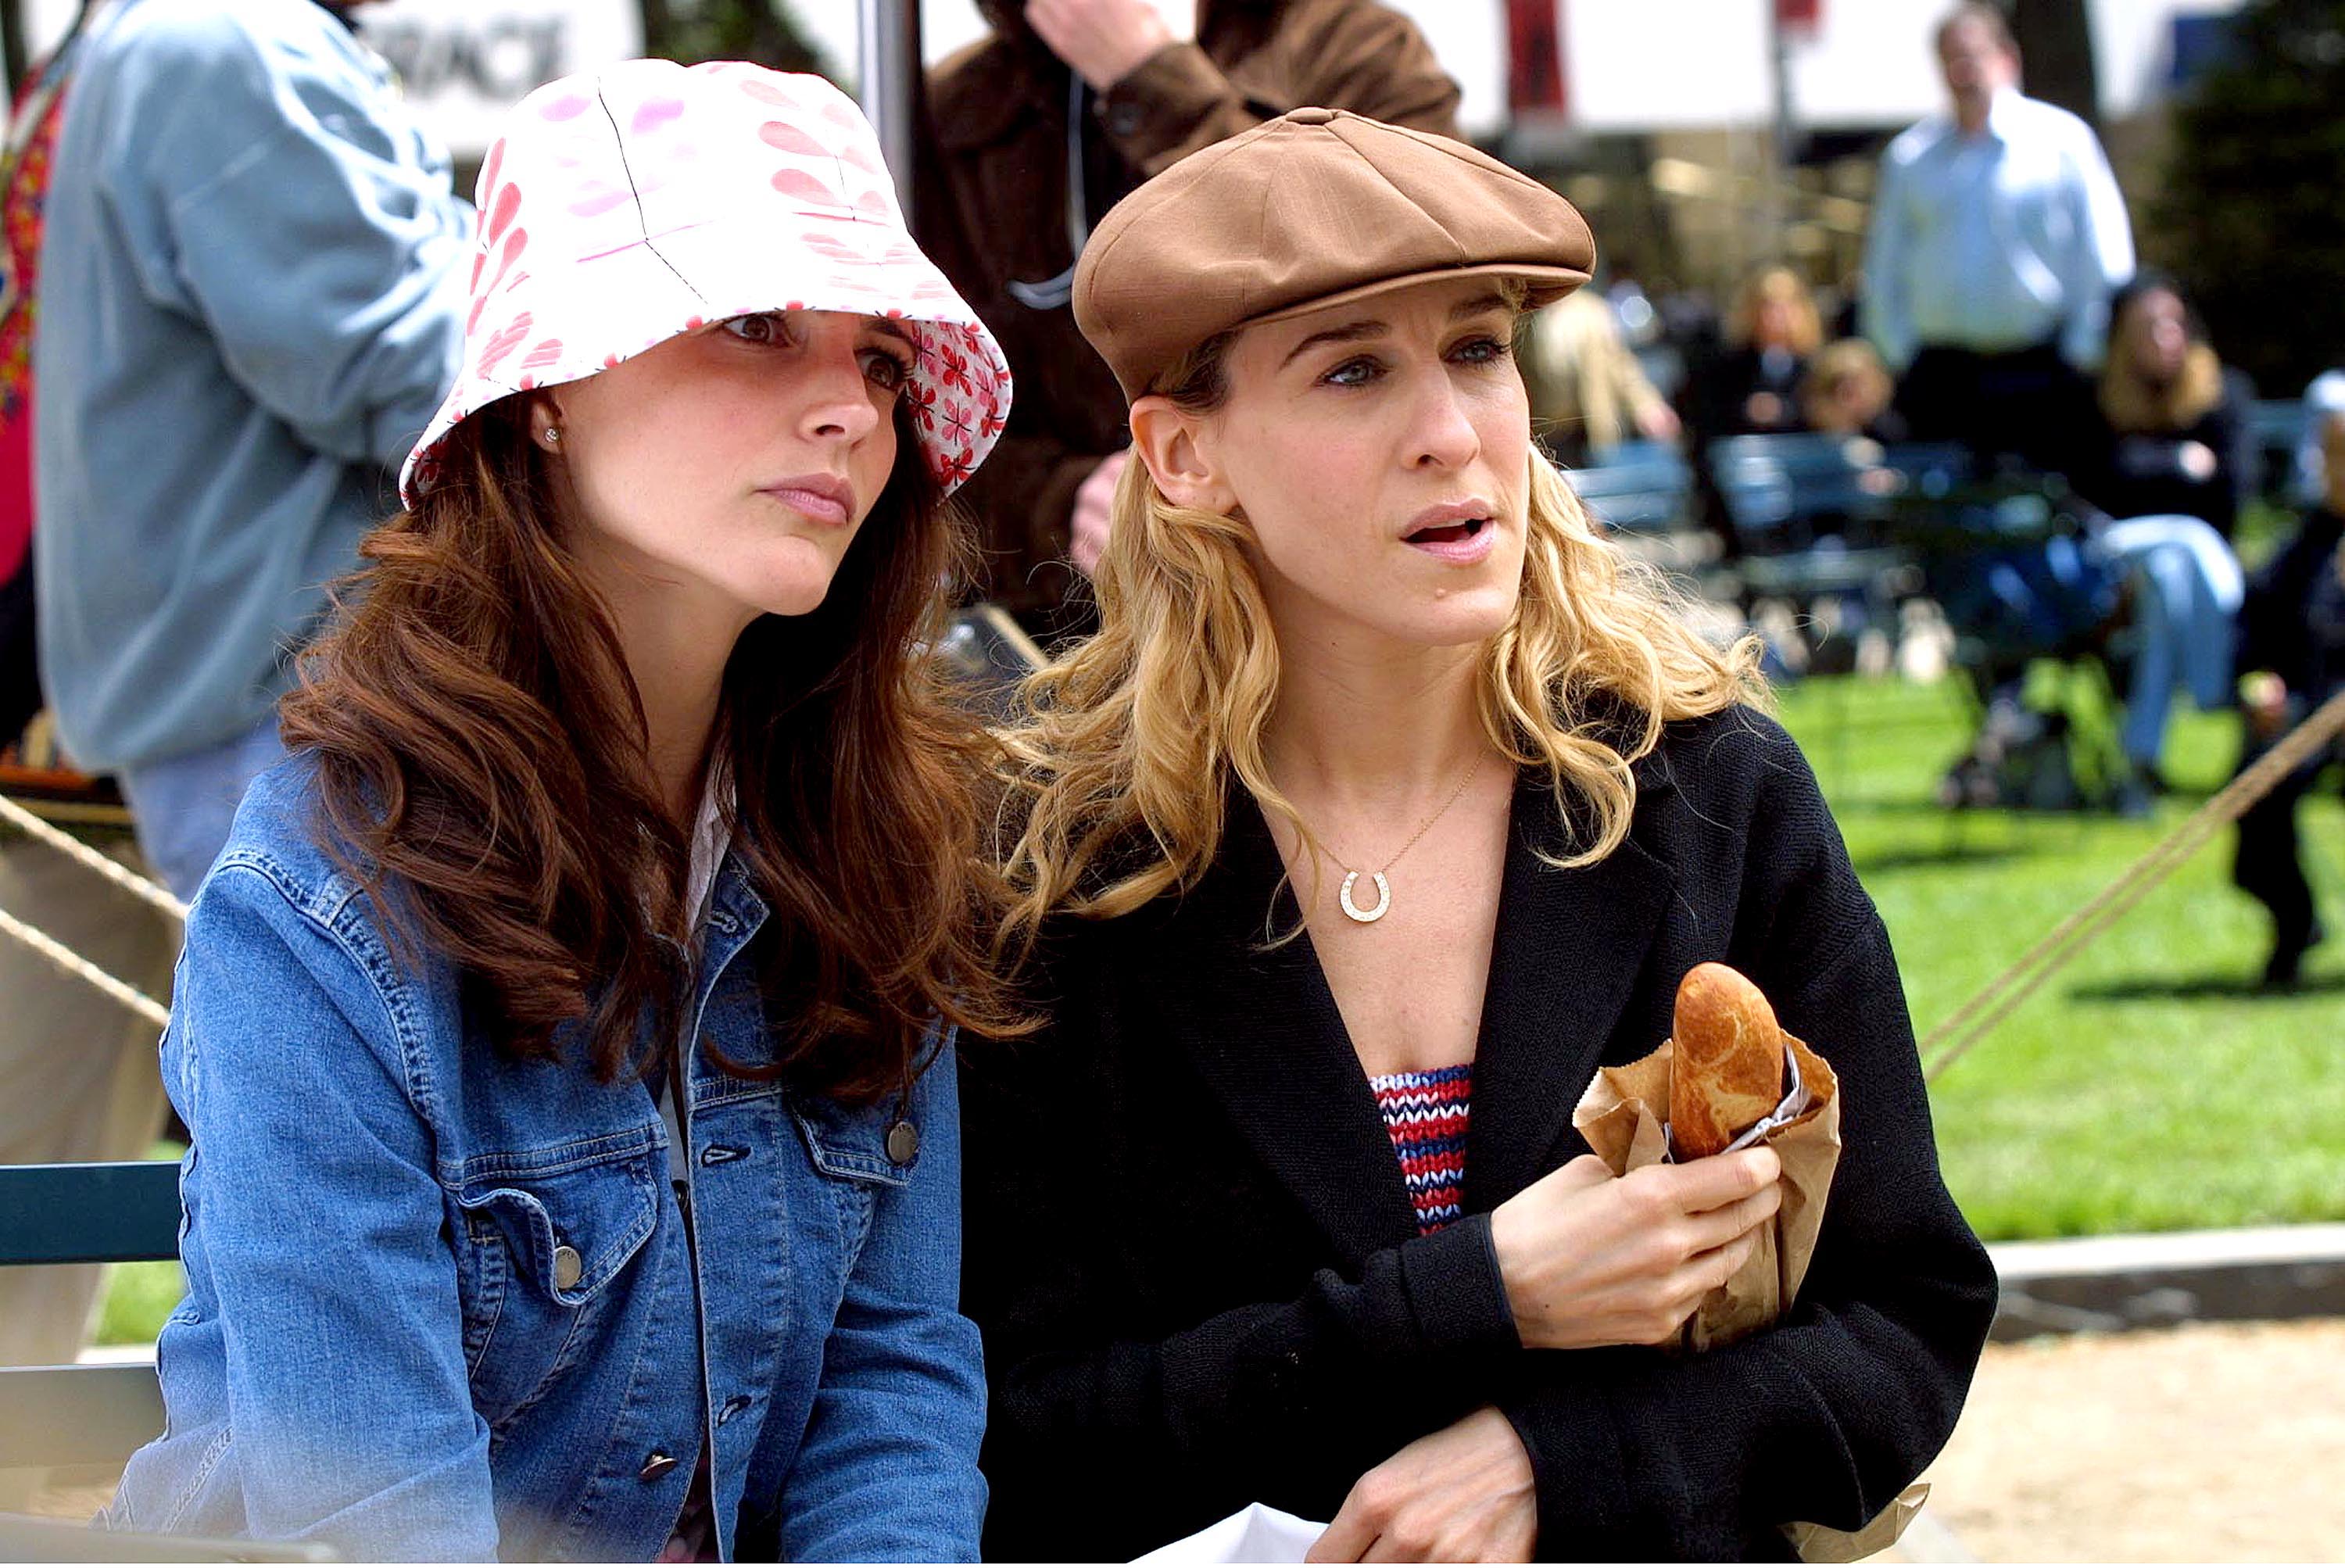 Kristin Davis as Charlotte York and Sarah Jessica Parker as Carrie Bradshaw in 'Sex and the City'